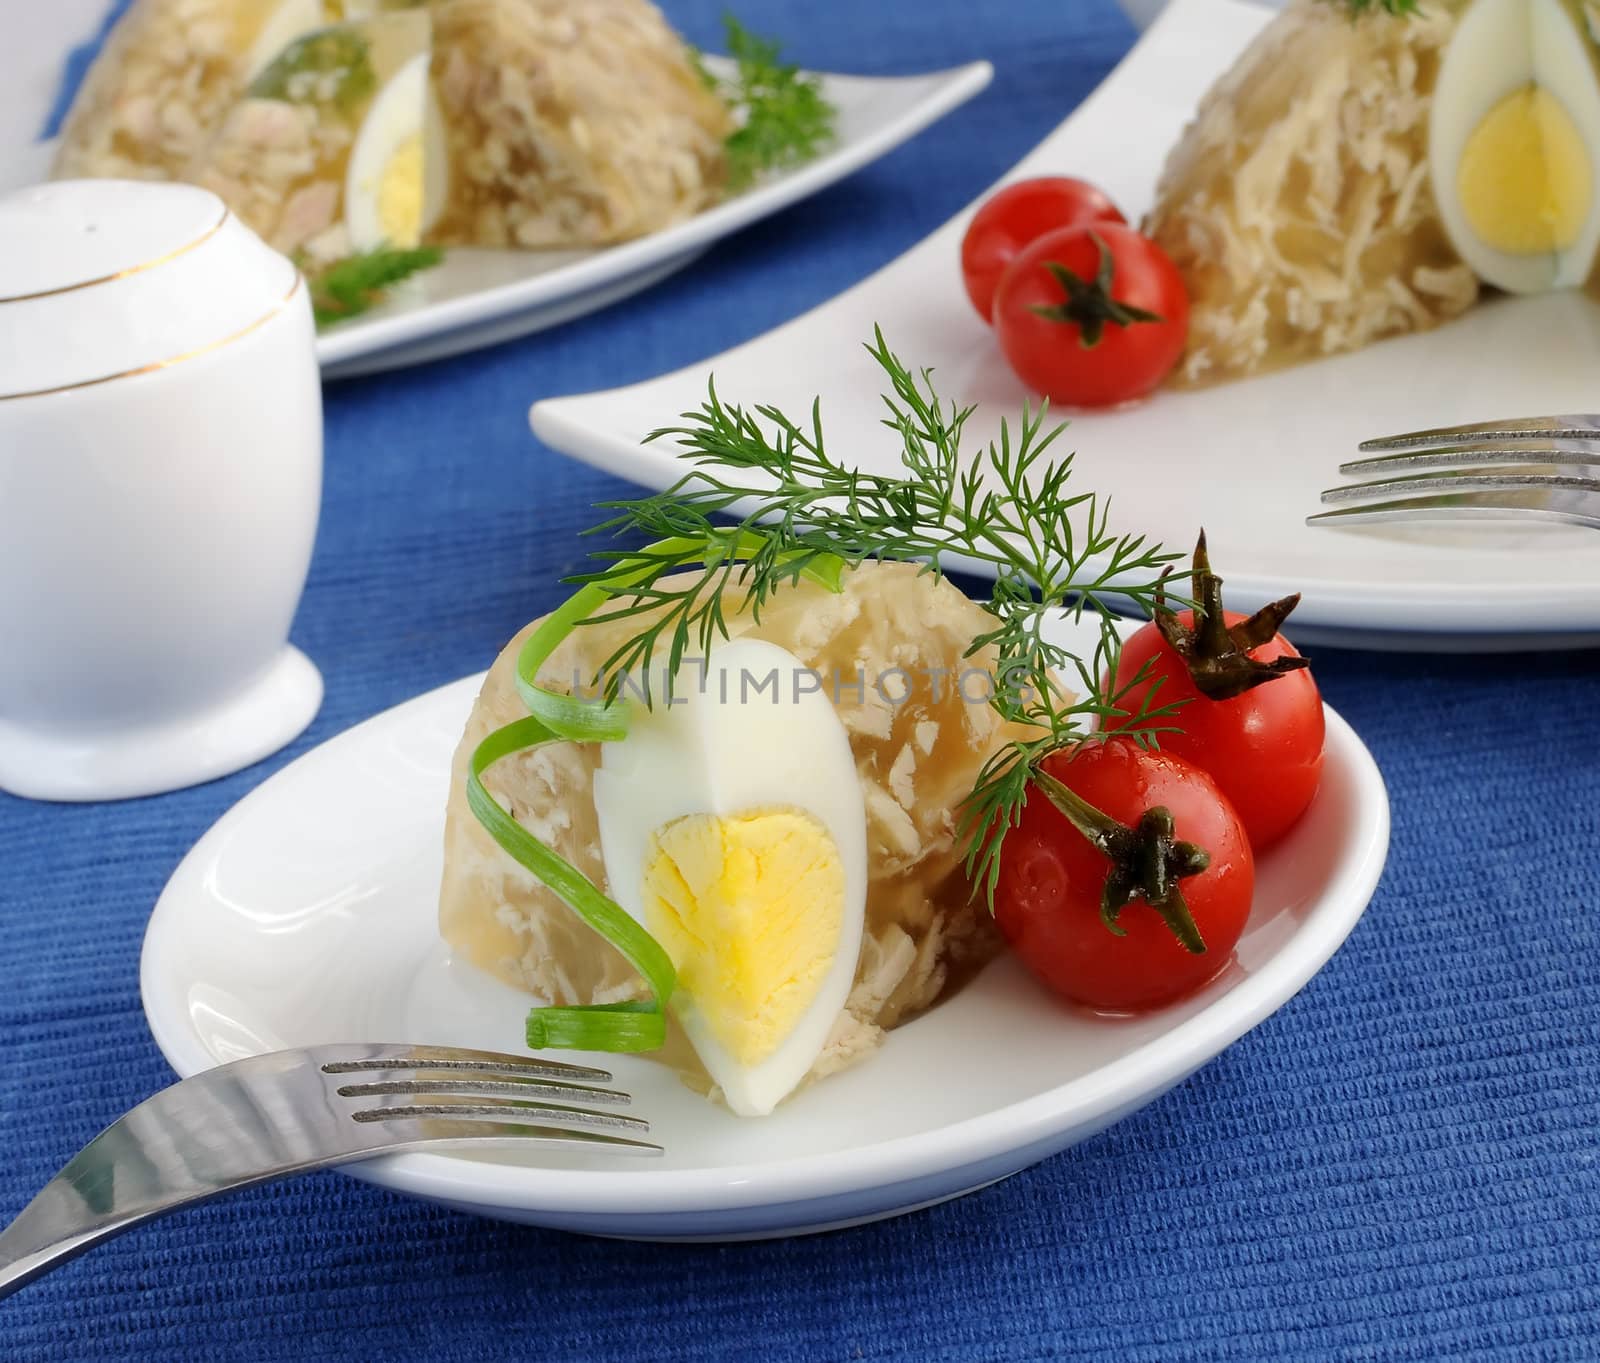 A piece of jellied chicken and egg by Apolonia